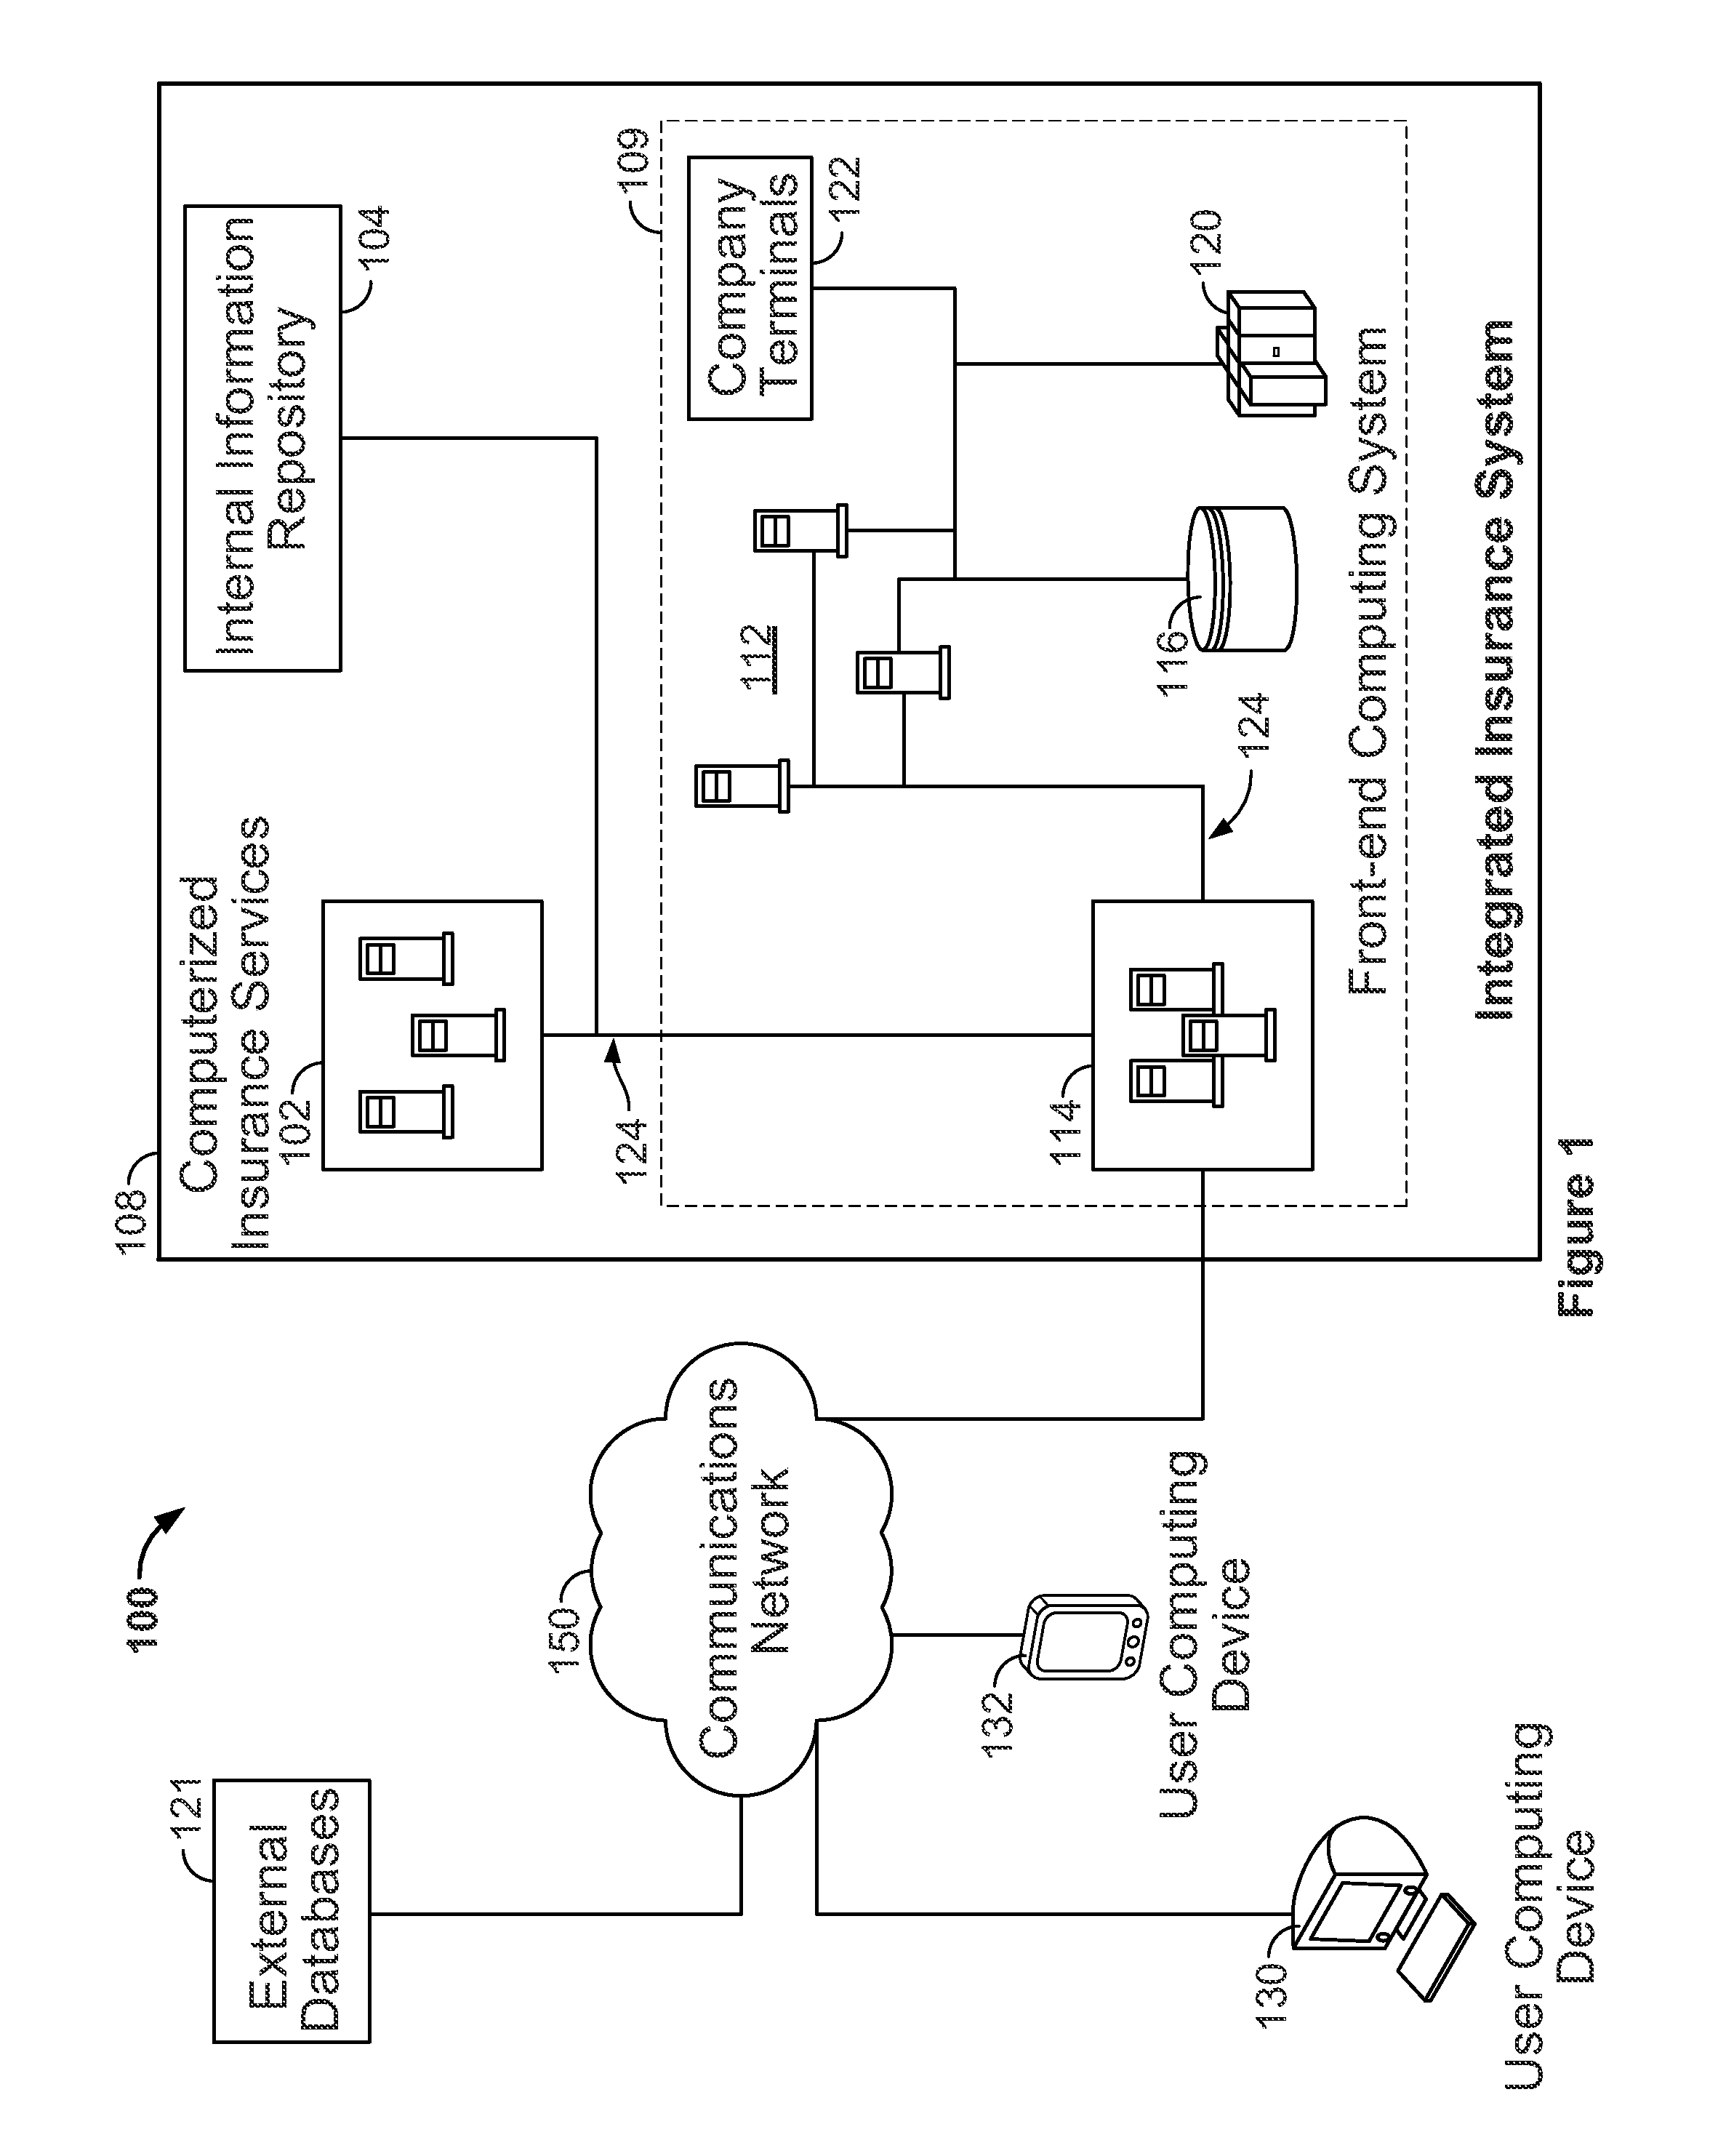 System and method for secure self registration with an insurance portal